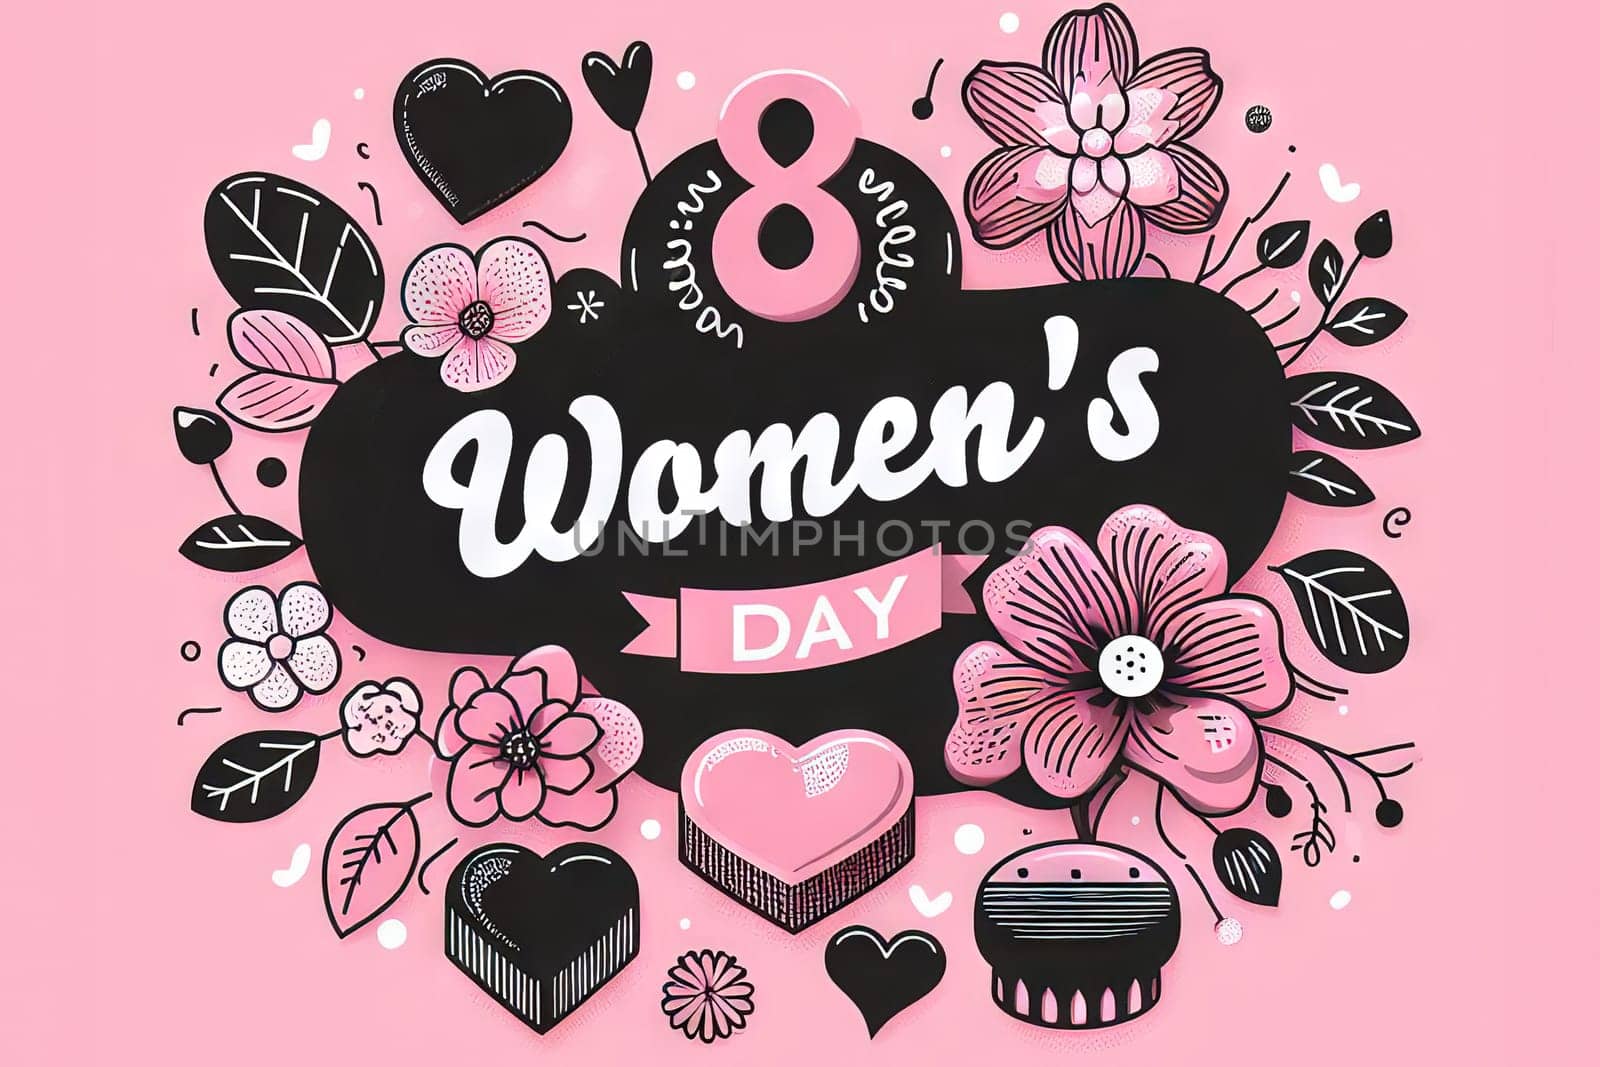 8 march women's day Poster or banner with flower on pink background. Promotion by EkaterinaPereslavtseva